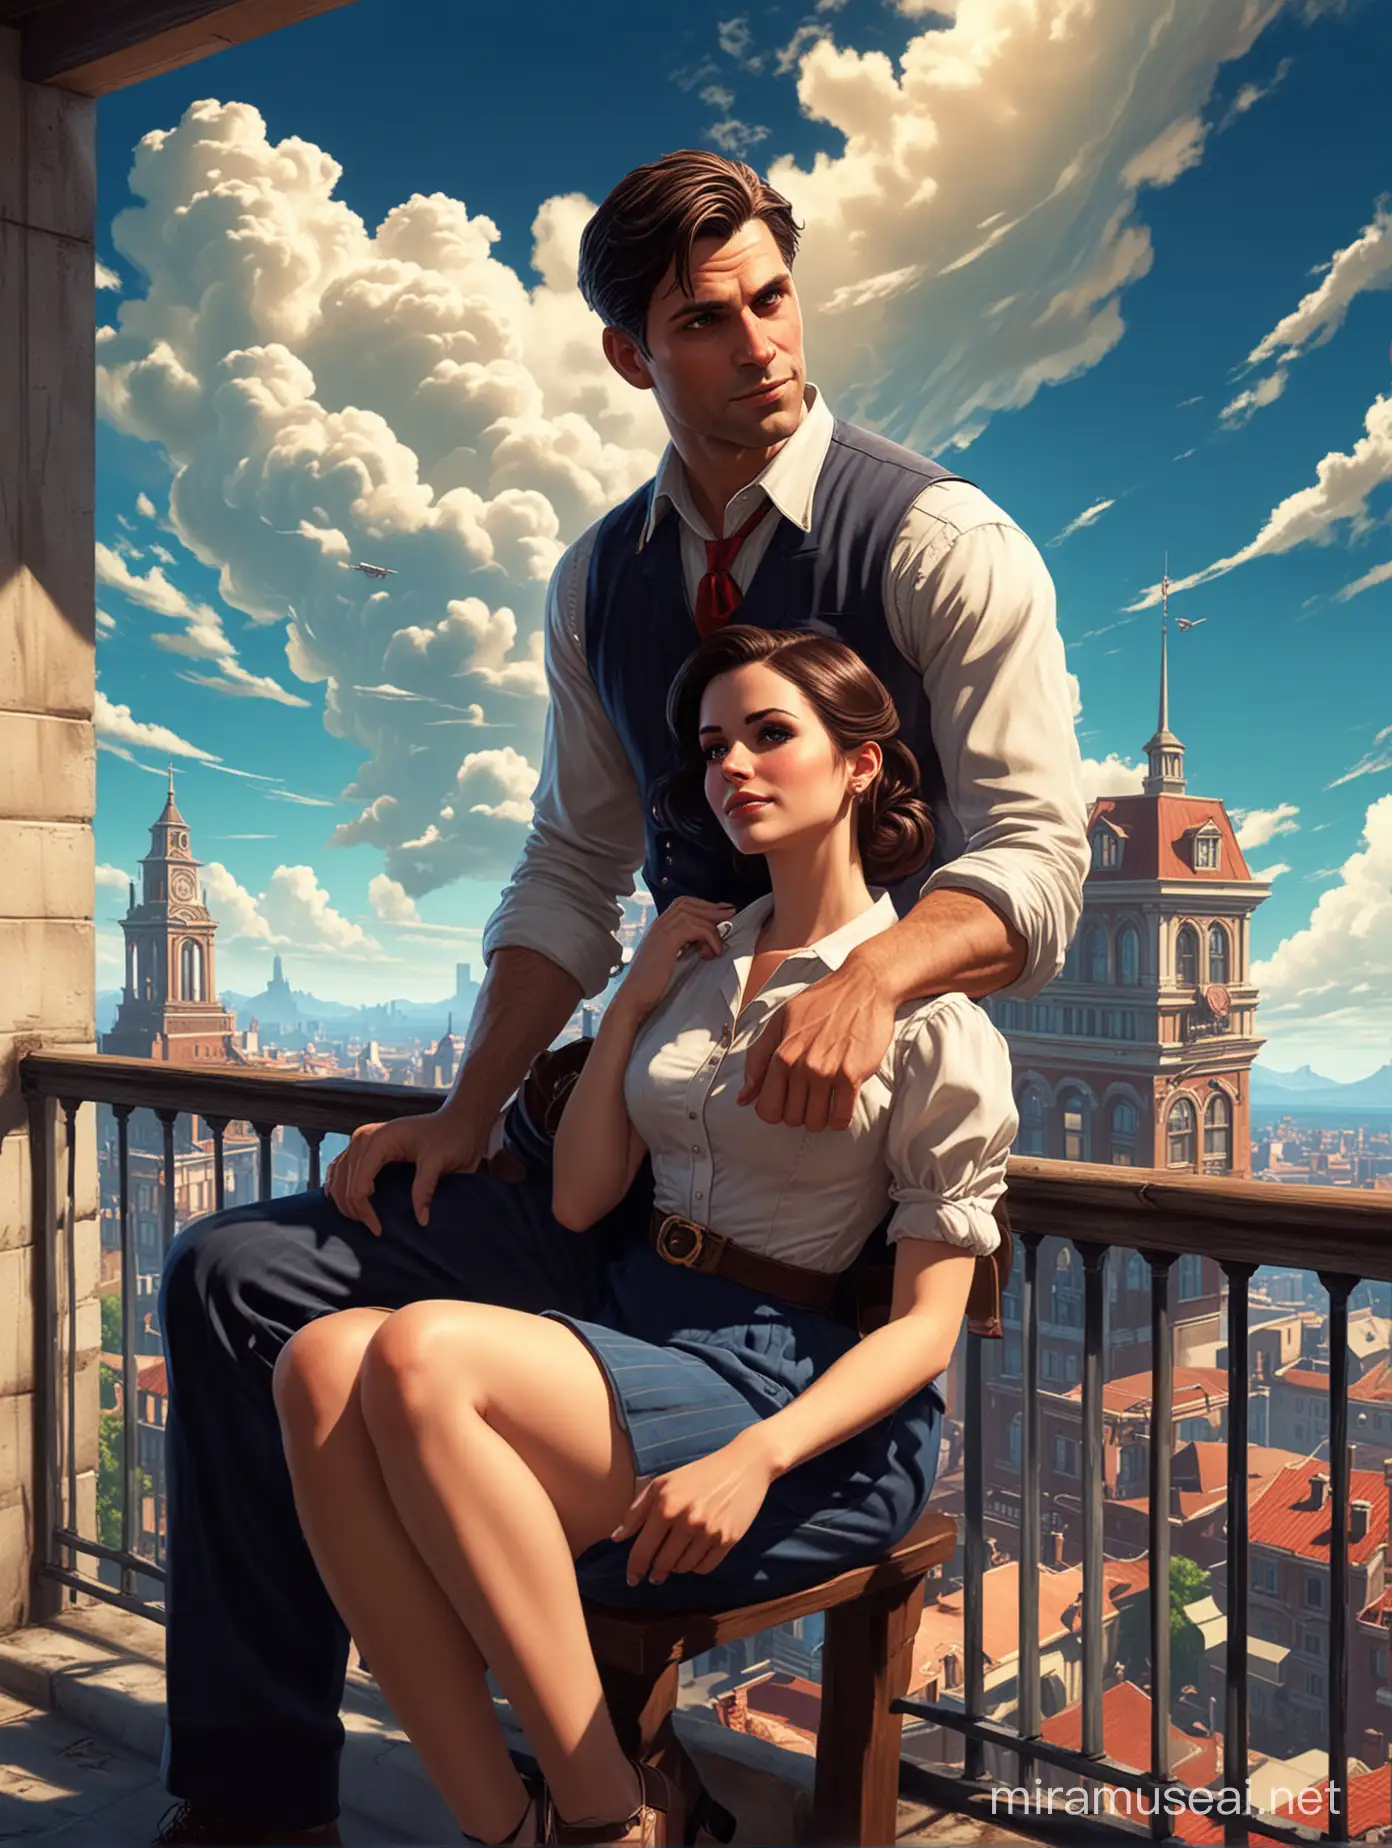 Booker Dewitt and Lana Del Rey Embrace on Columbia City Balcony Amidst Azure Clouds